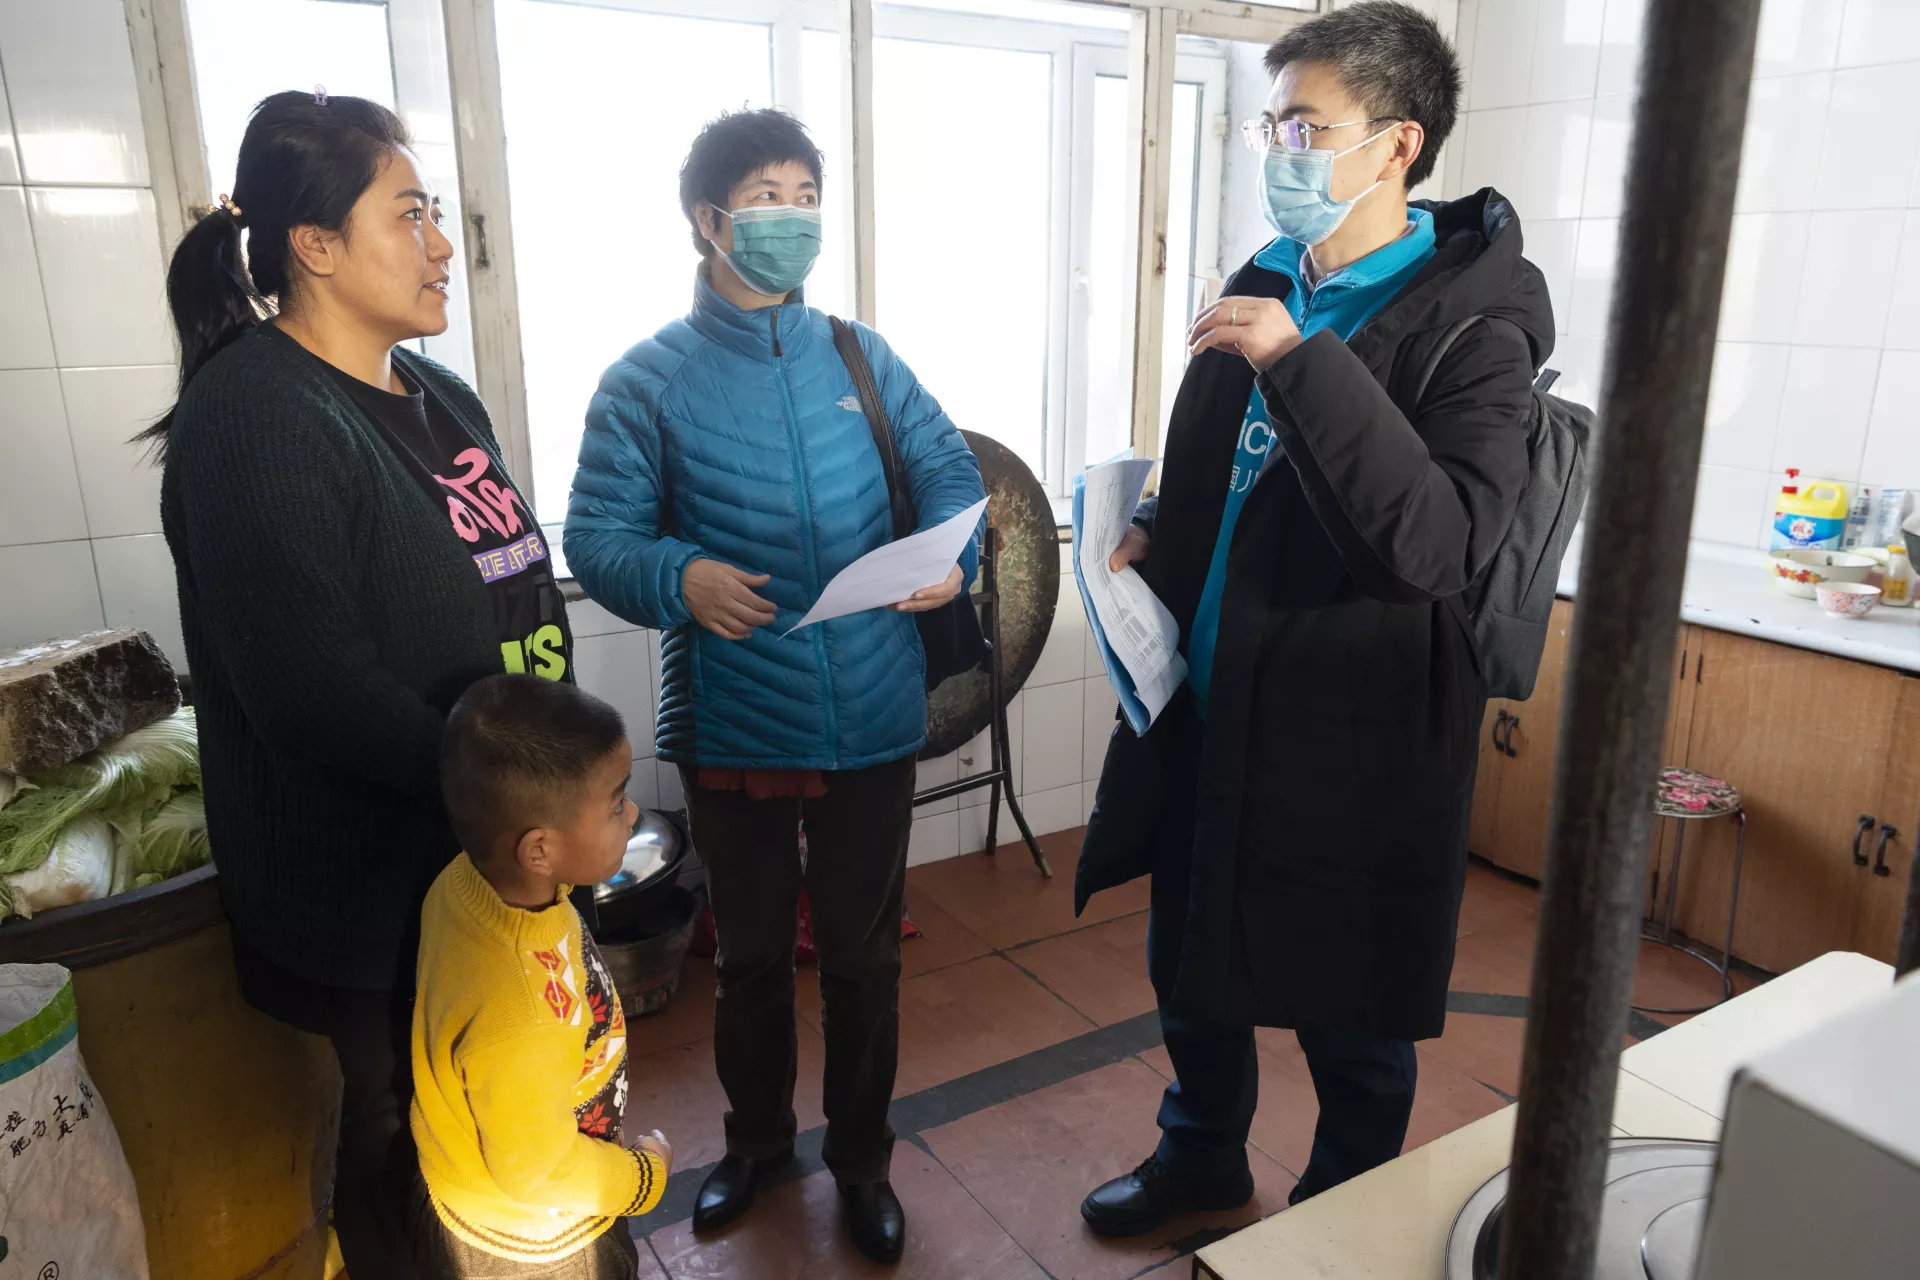 Sun Hui (1st from right), a programme officer from UNICEF China, talks to a mother about how to reduce indoor air pollution during a visit to a rural household in Jiamusi, Heilongjiang Province, on 30 November 2020.